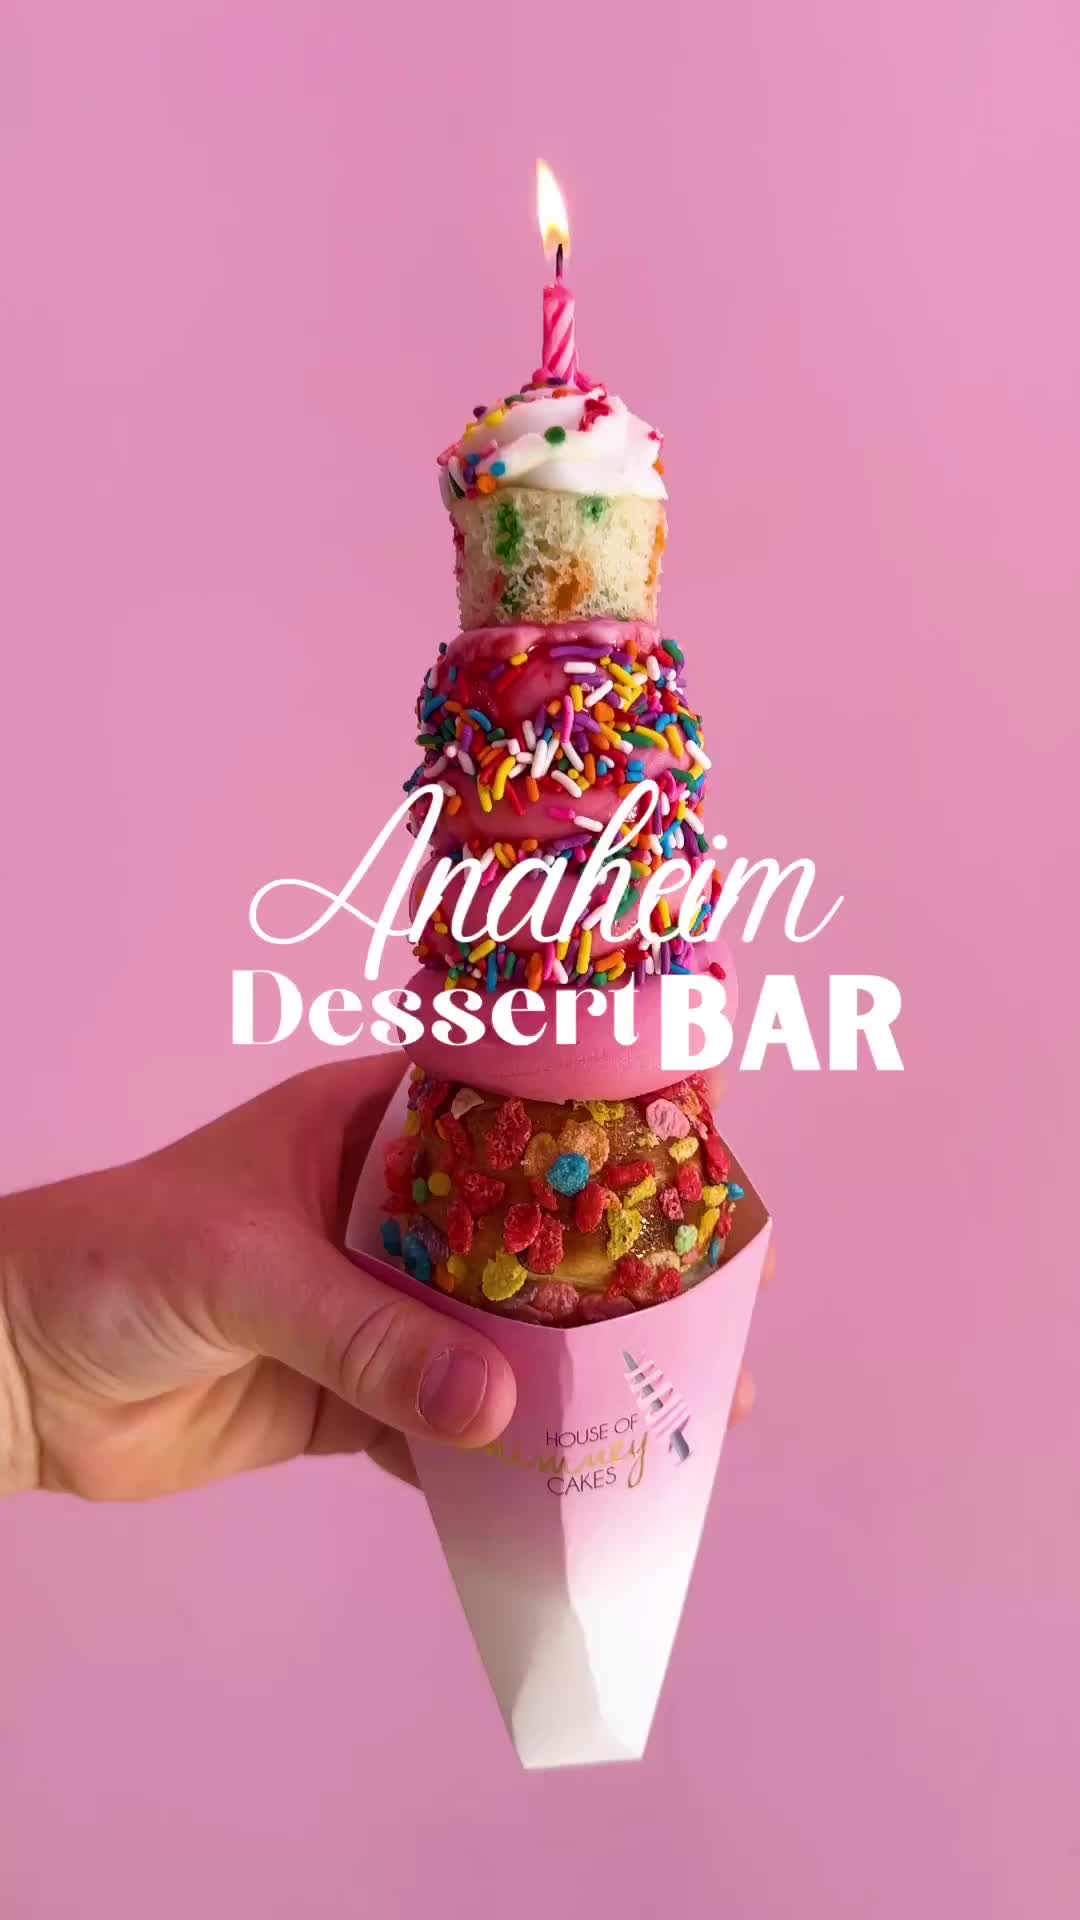 Must-See Over The Top Desserts in Anaheim! 🍦🩷